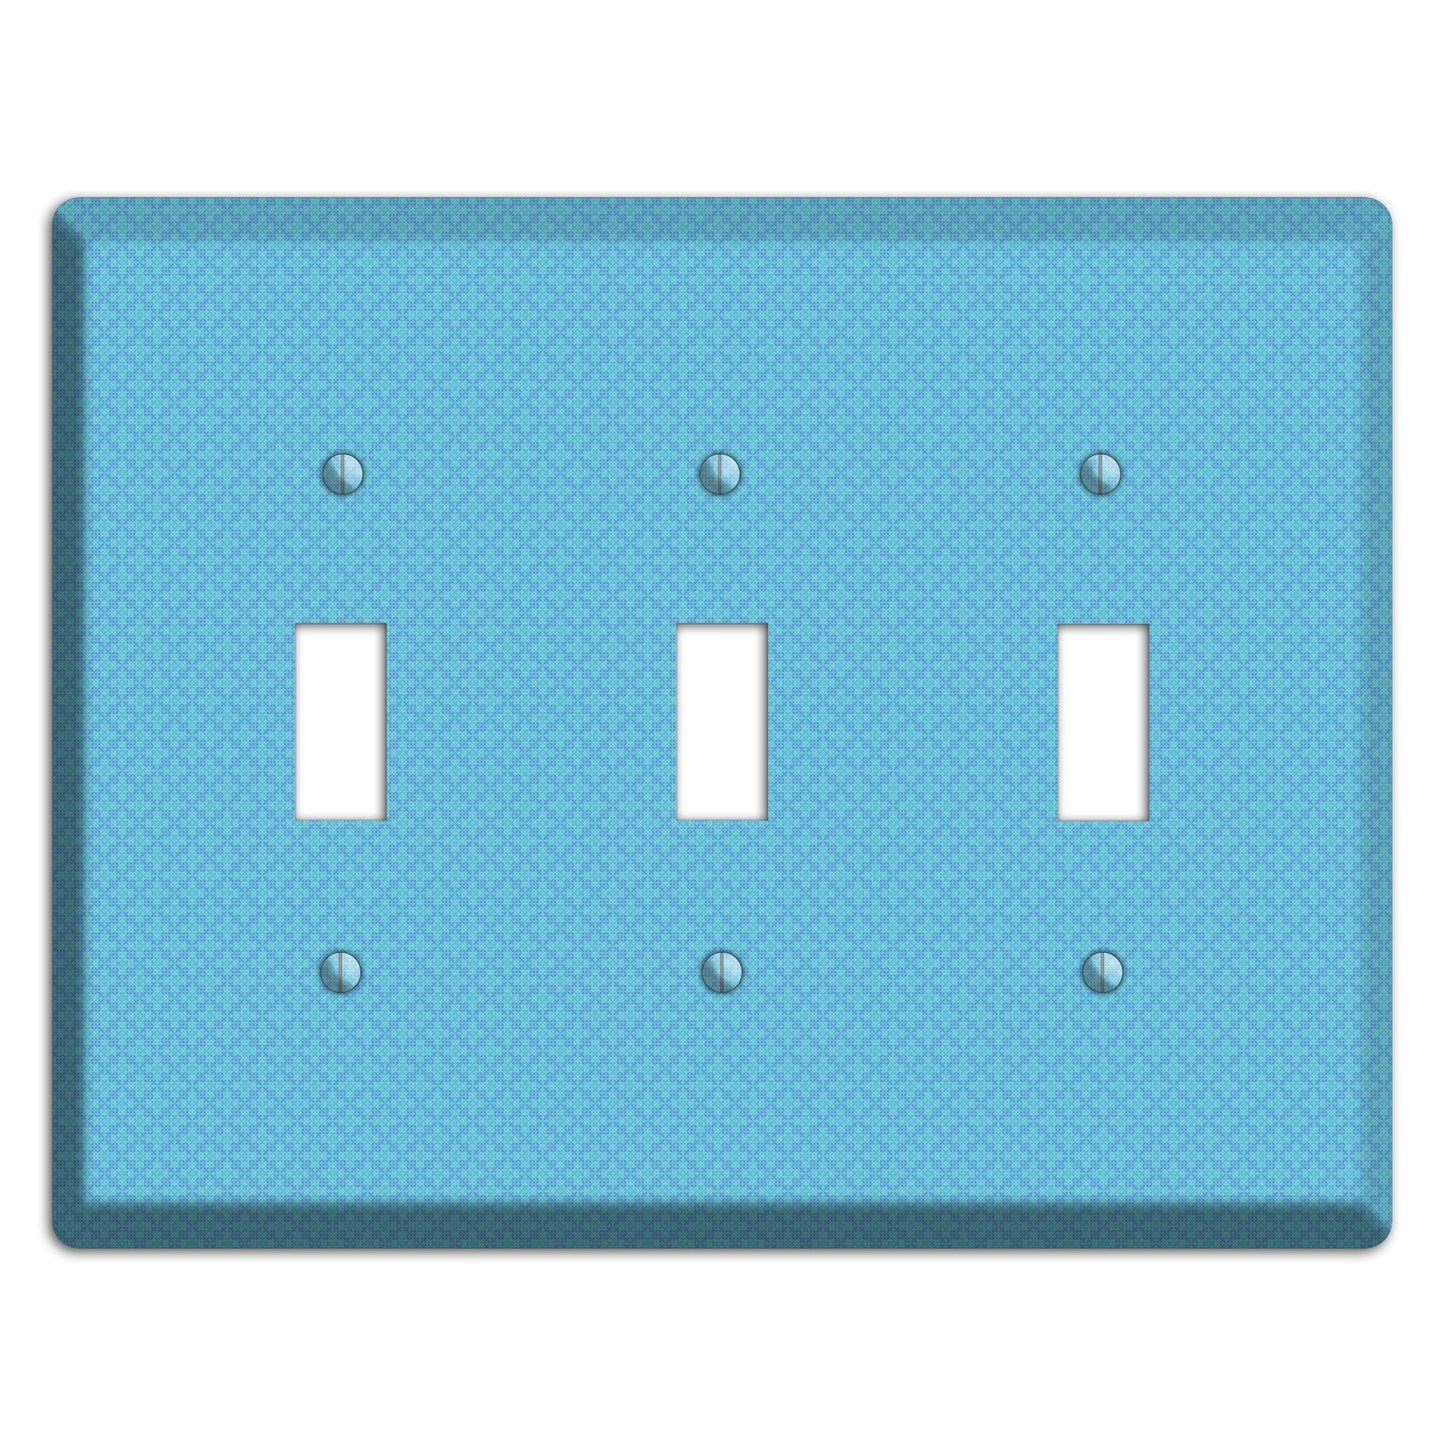 Turquoise Checkered Quatrefoil 3 Toggle Wallplate